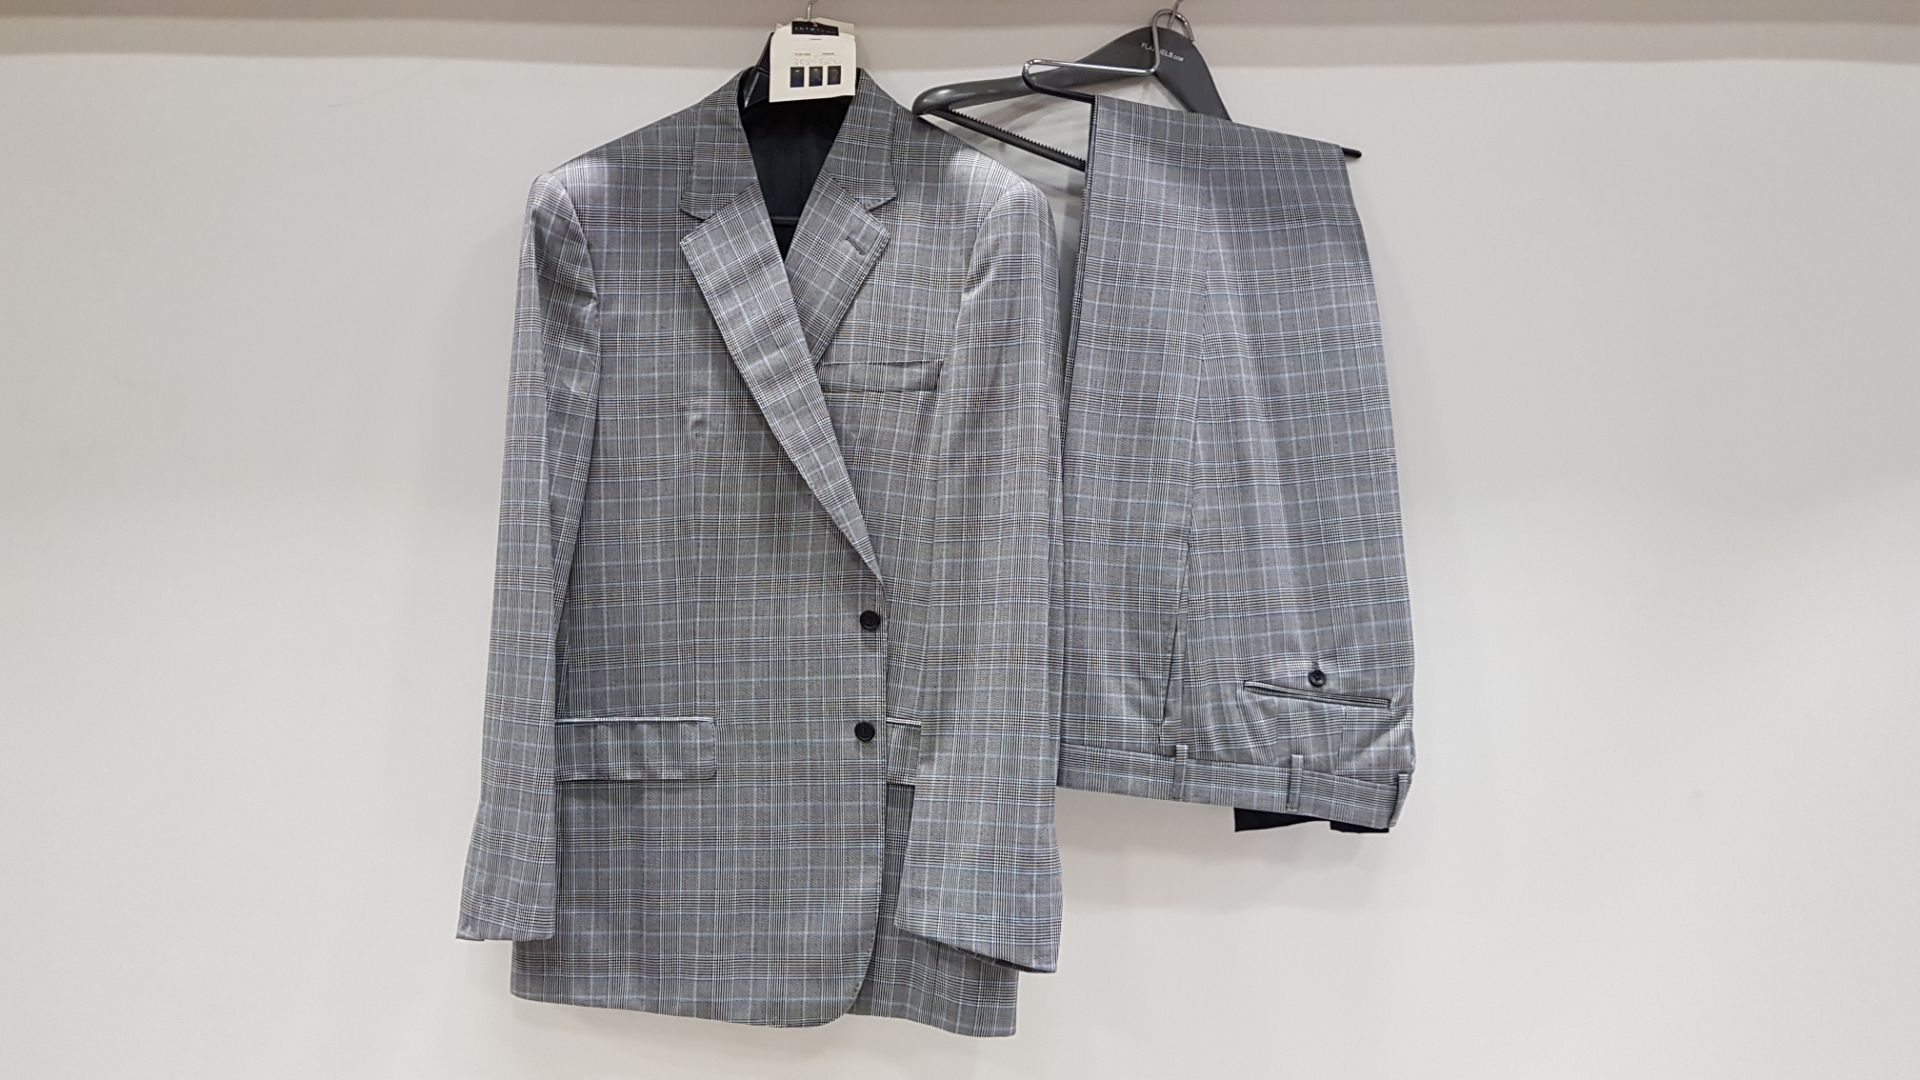 3 X BRAND NEW LUTWYCHE 2 PC GREY AND BLUE CHEQUERED SUITS SIZE 40R, 42R AND 46R (NOTE SUITS ARE